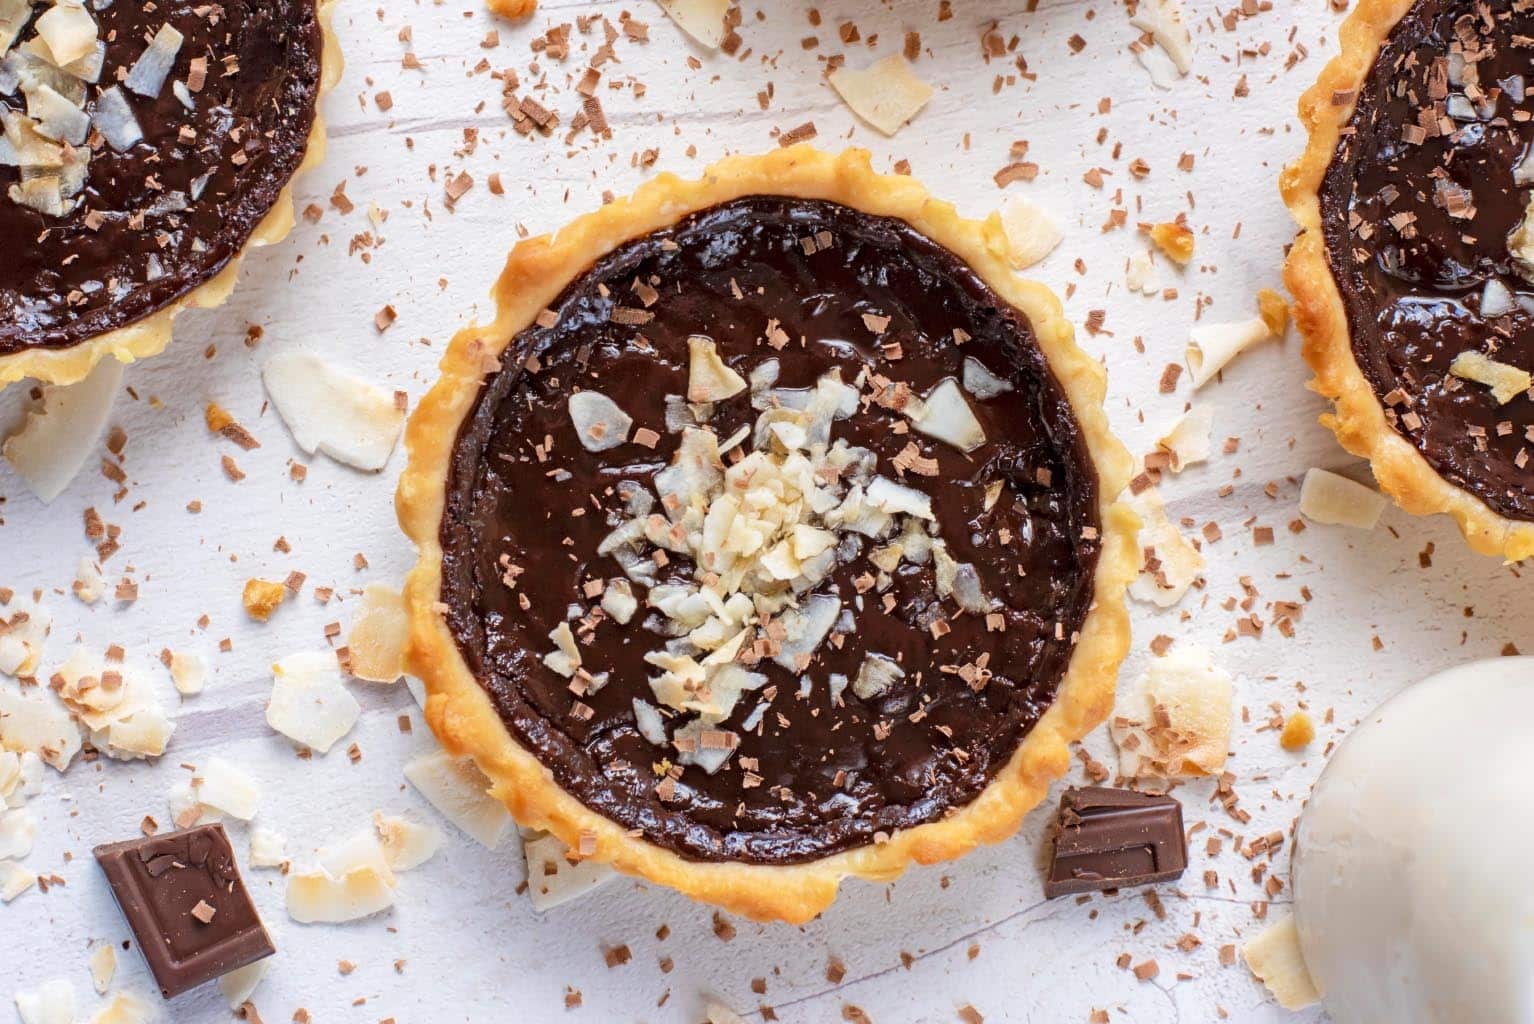 Chocolate Pie topped with coconut flakes.